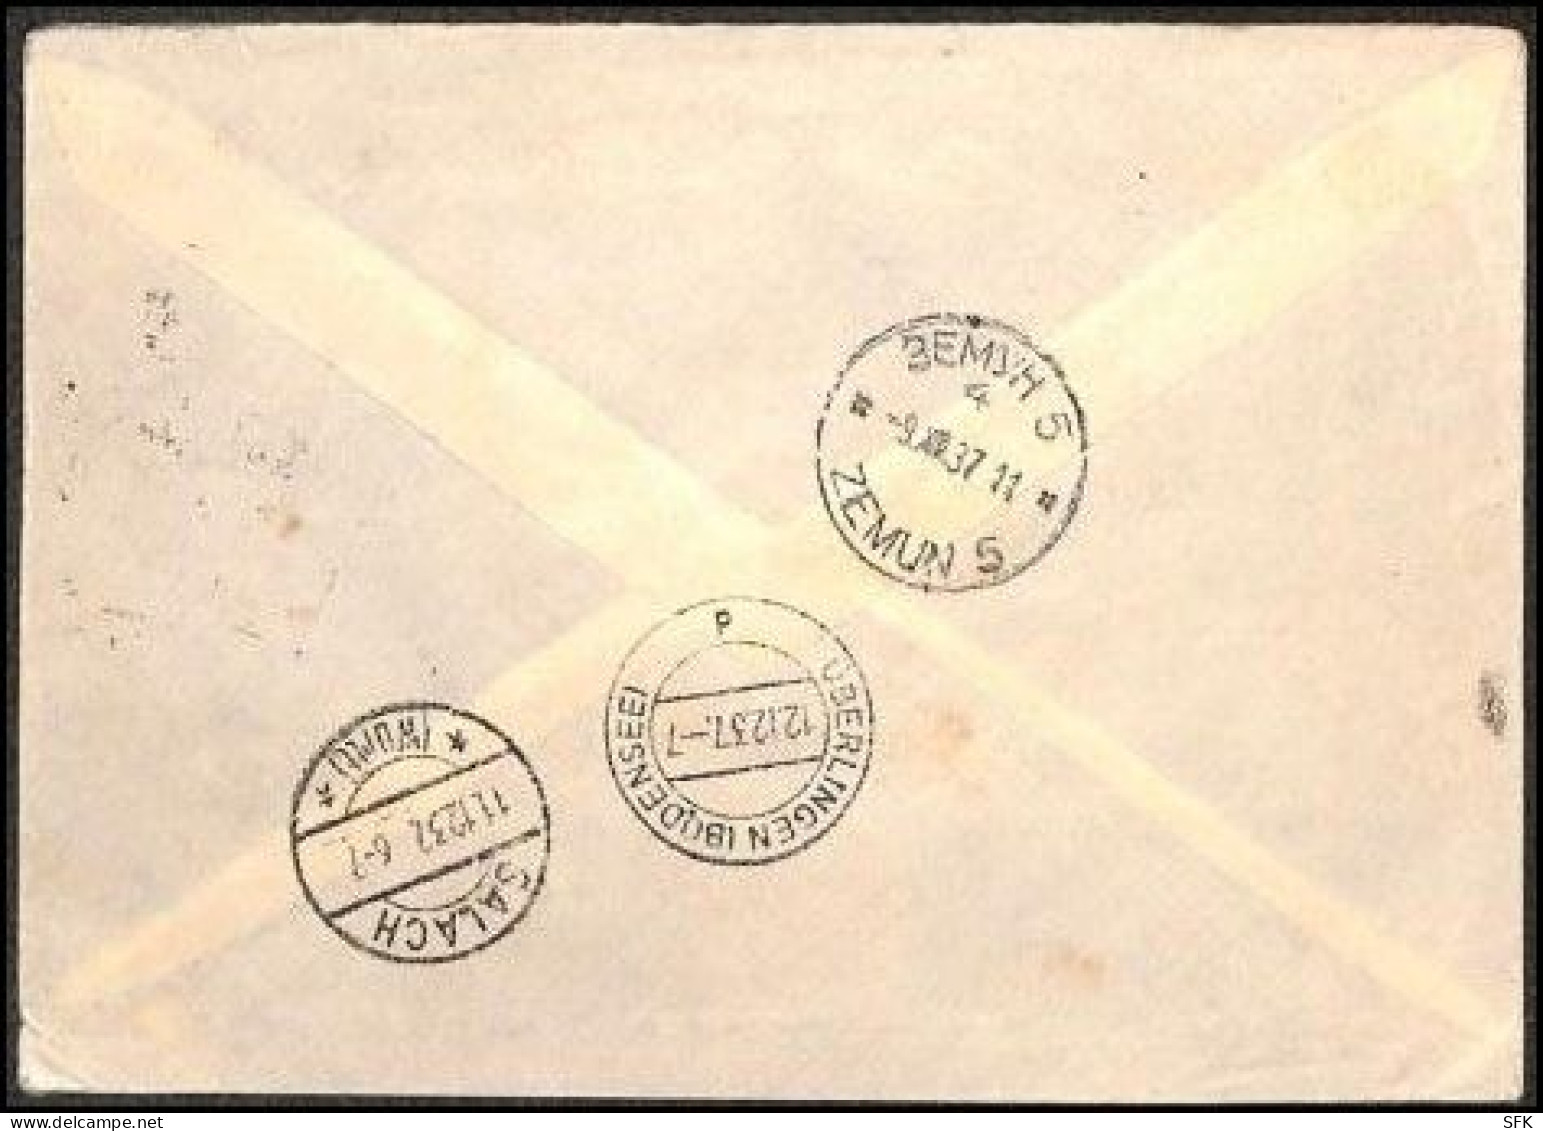 1937 Airmail Letter From Belgrade Airport Zemun 5 To Wirnterberg Sent By Lufthansa With Appropriate Franking, VF - Airmail